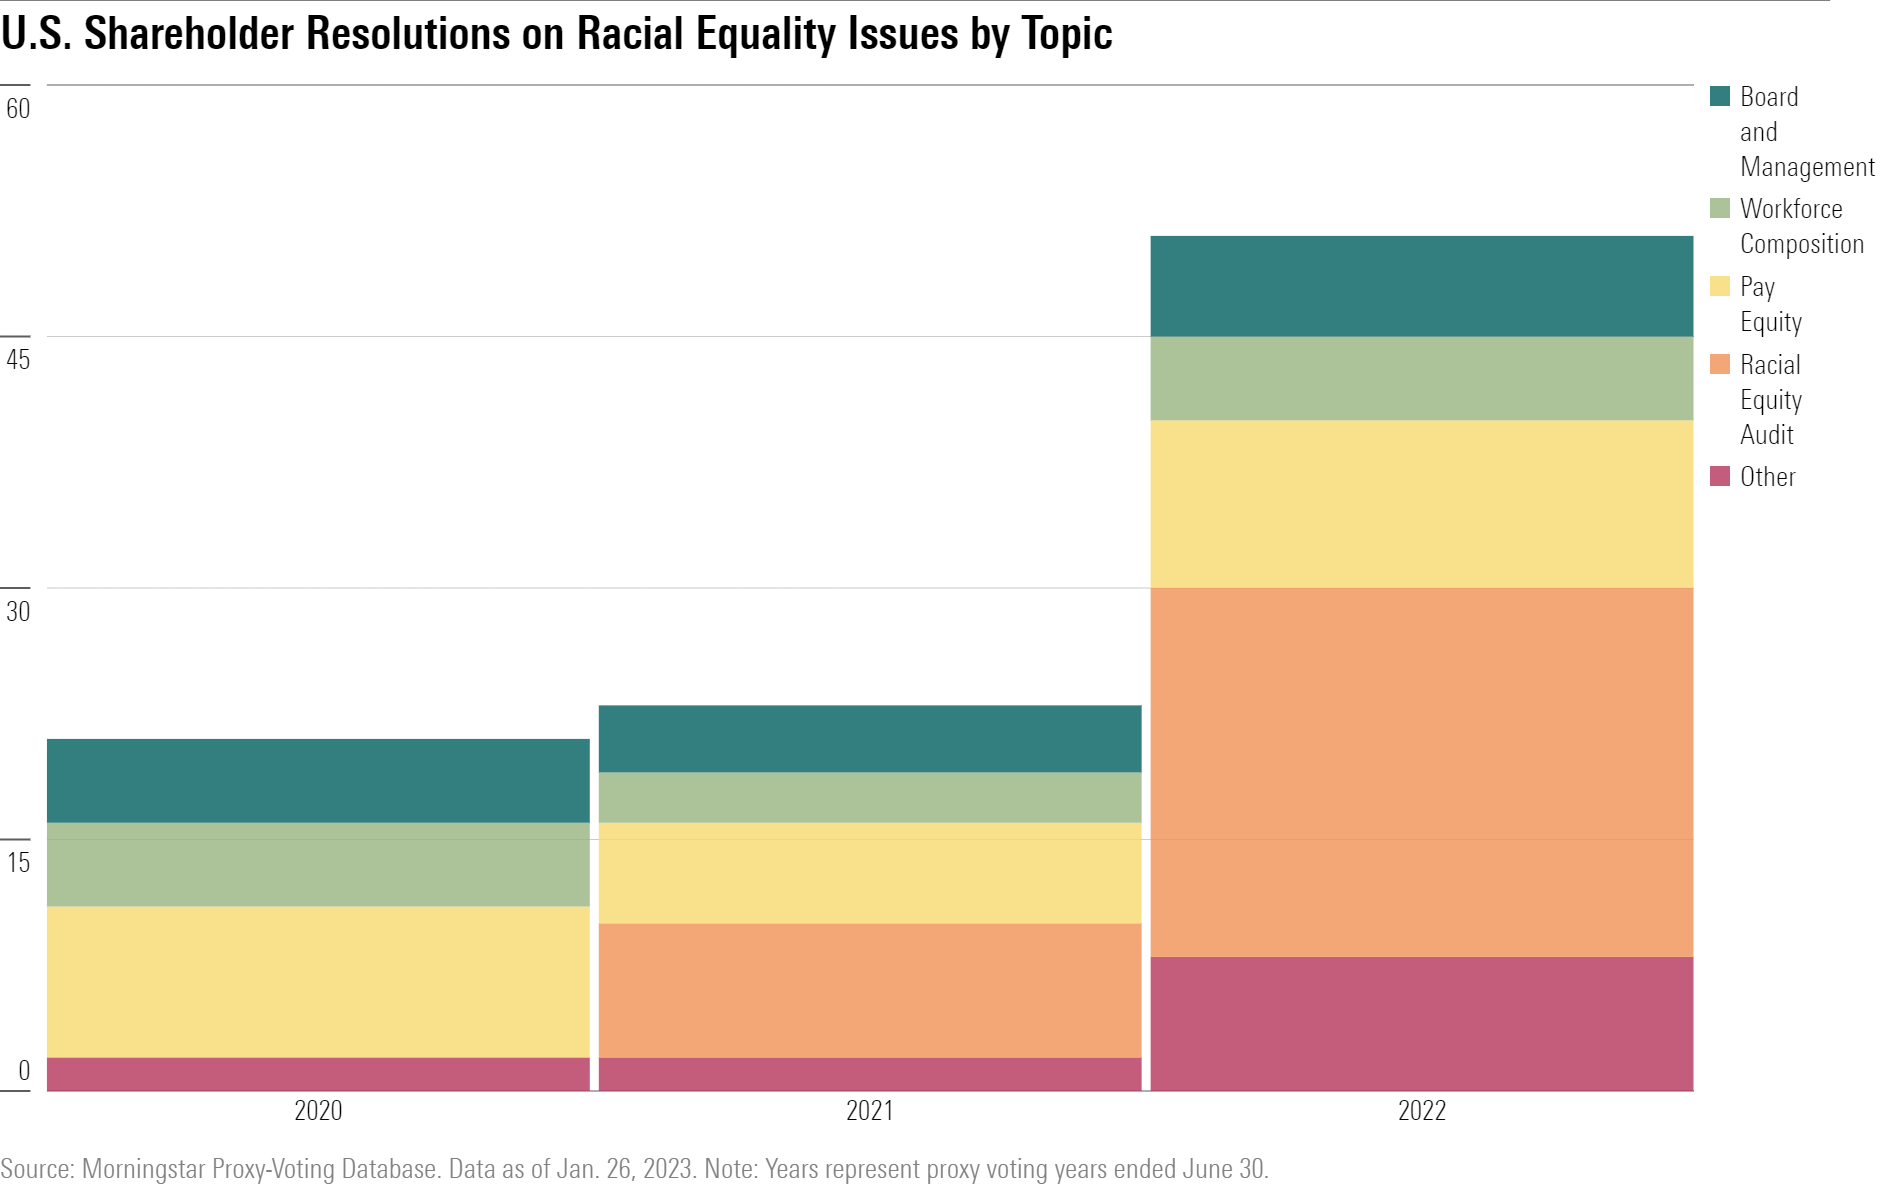 A bar chart breaking down racial-equity shareholder resolutions by specific issues bewteen 2020 and 2022.